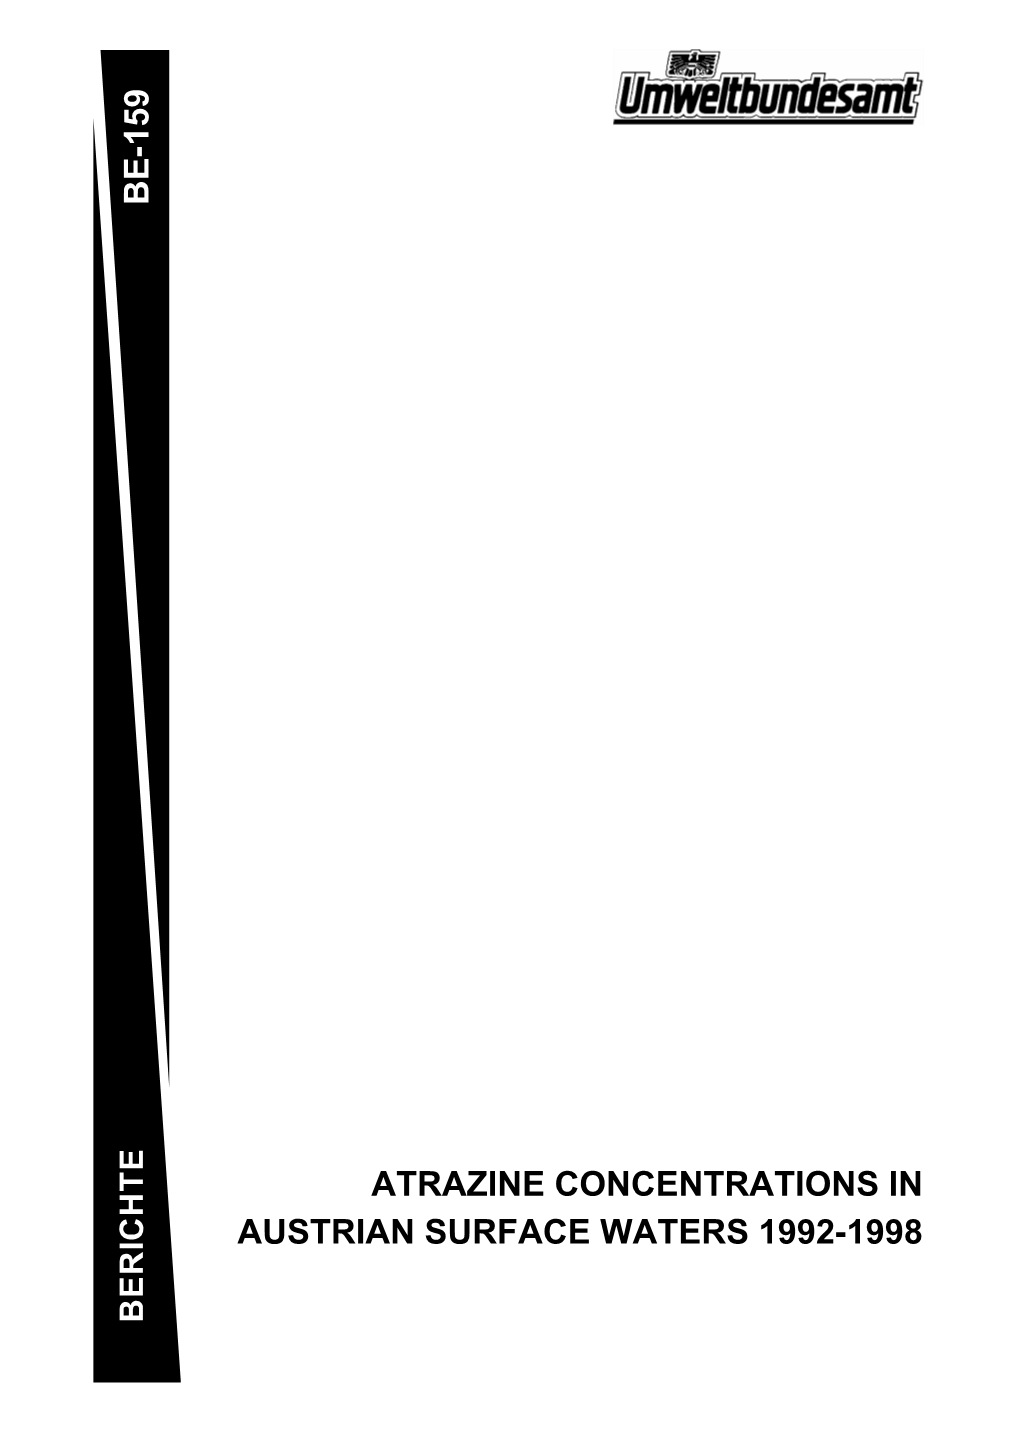 Atrazine Concentrations in Austrian Surface Waters 1992-1998